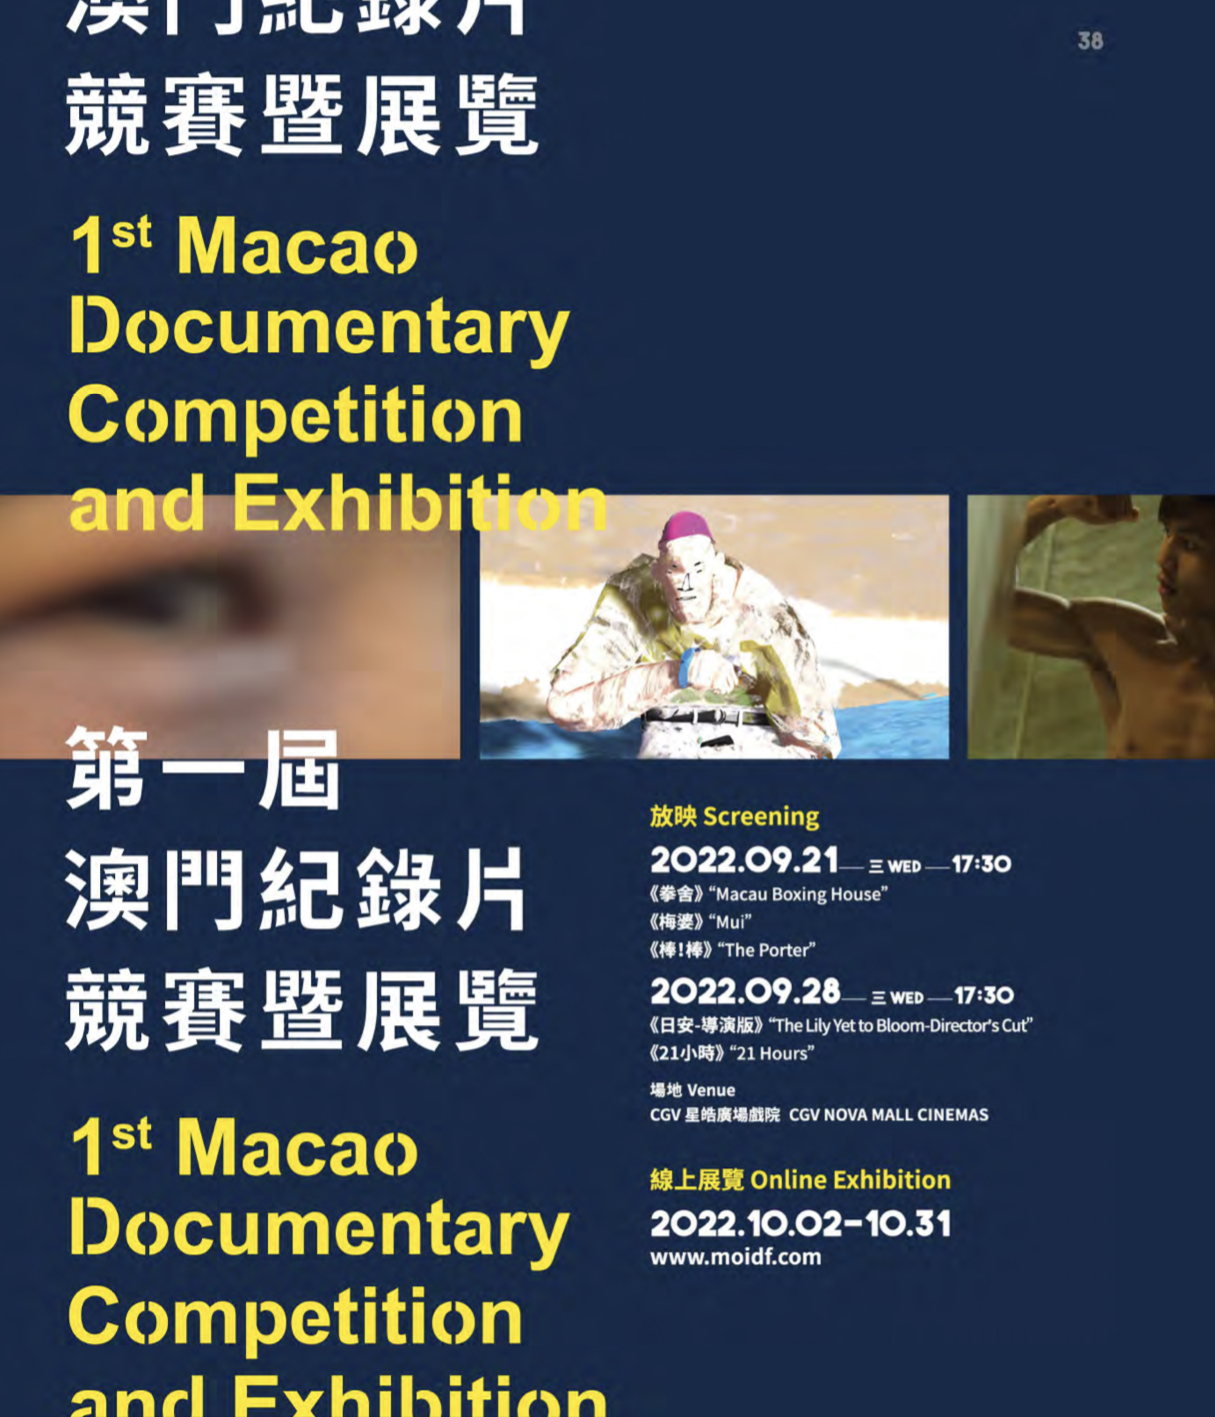 1st Macao Documentary Competition